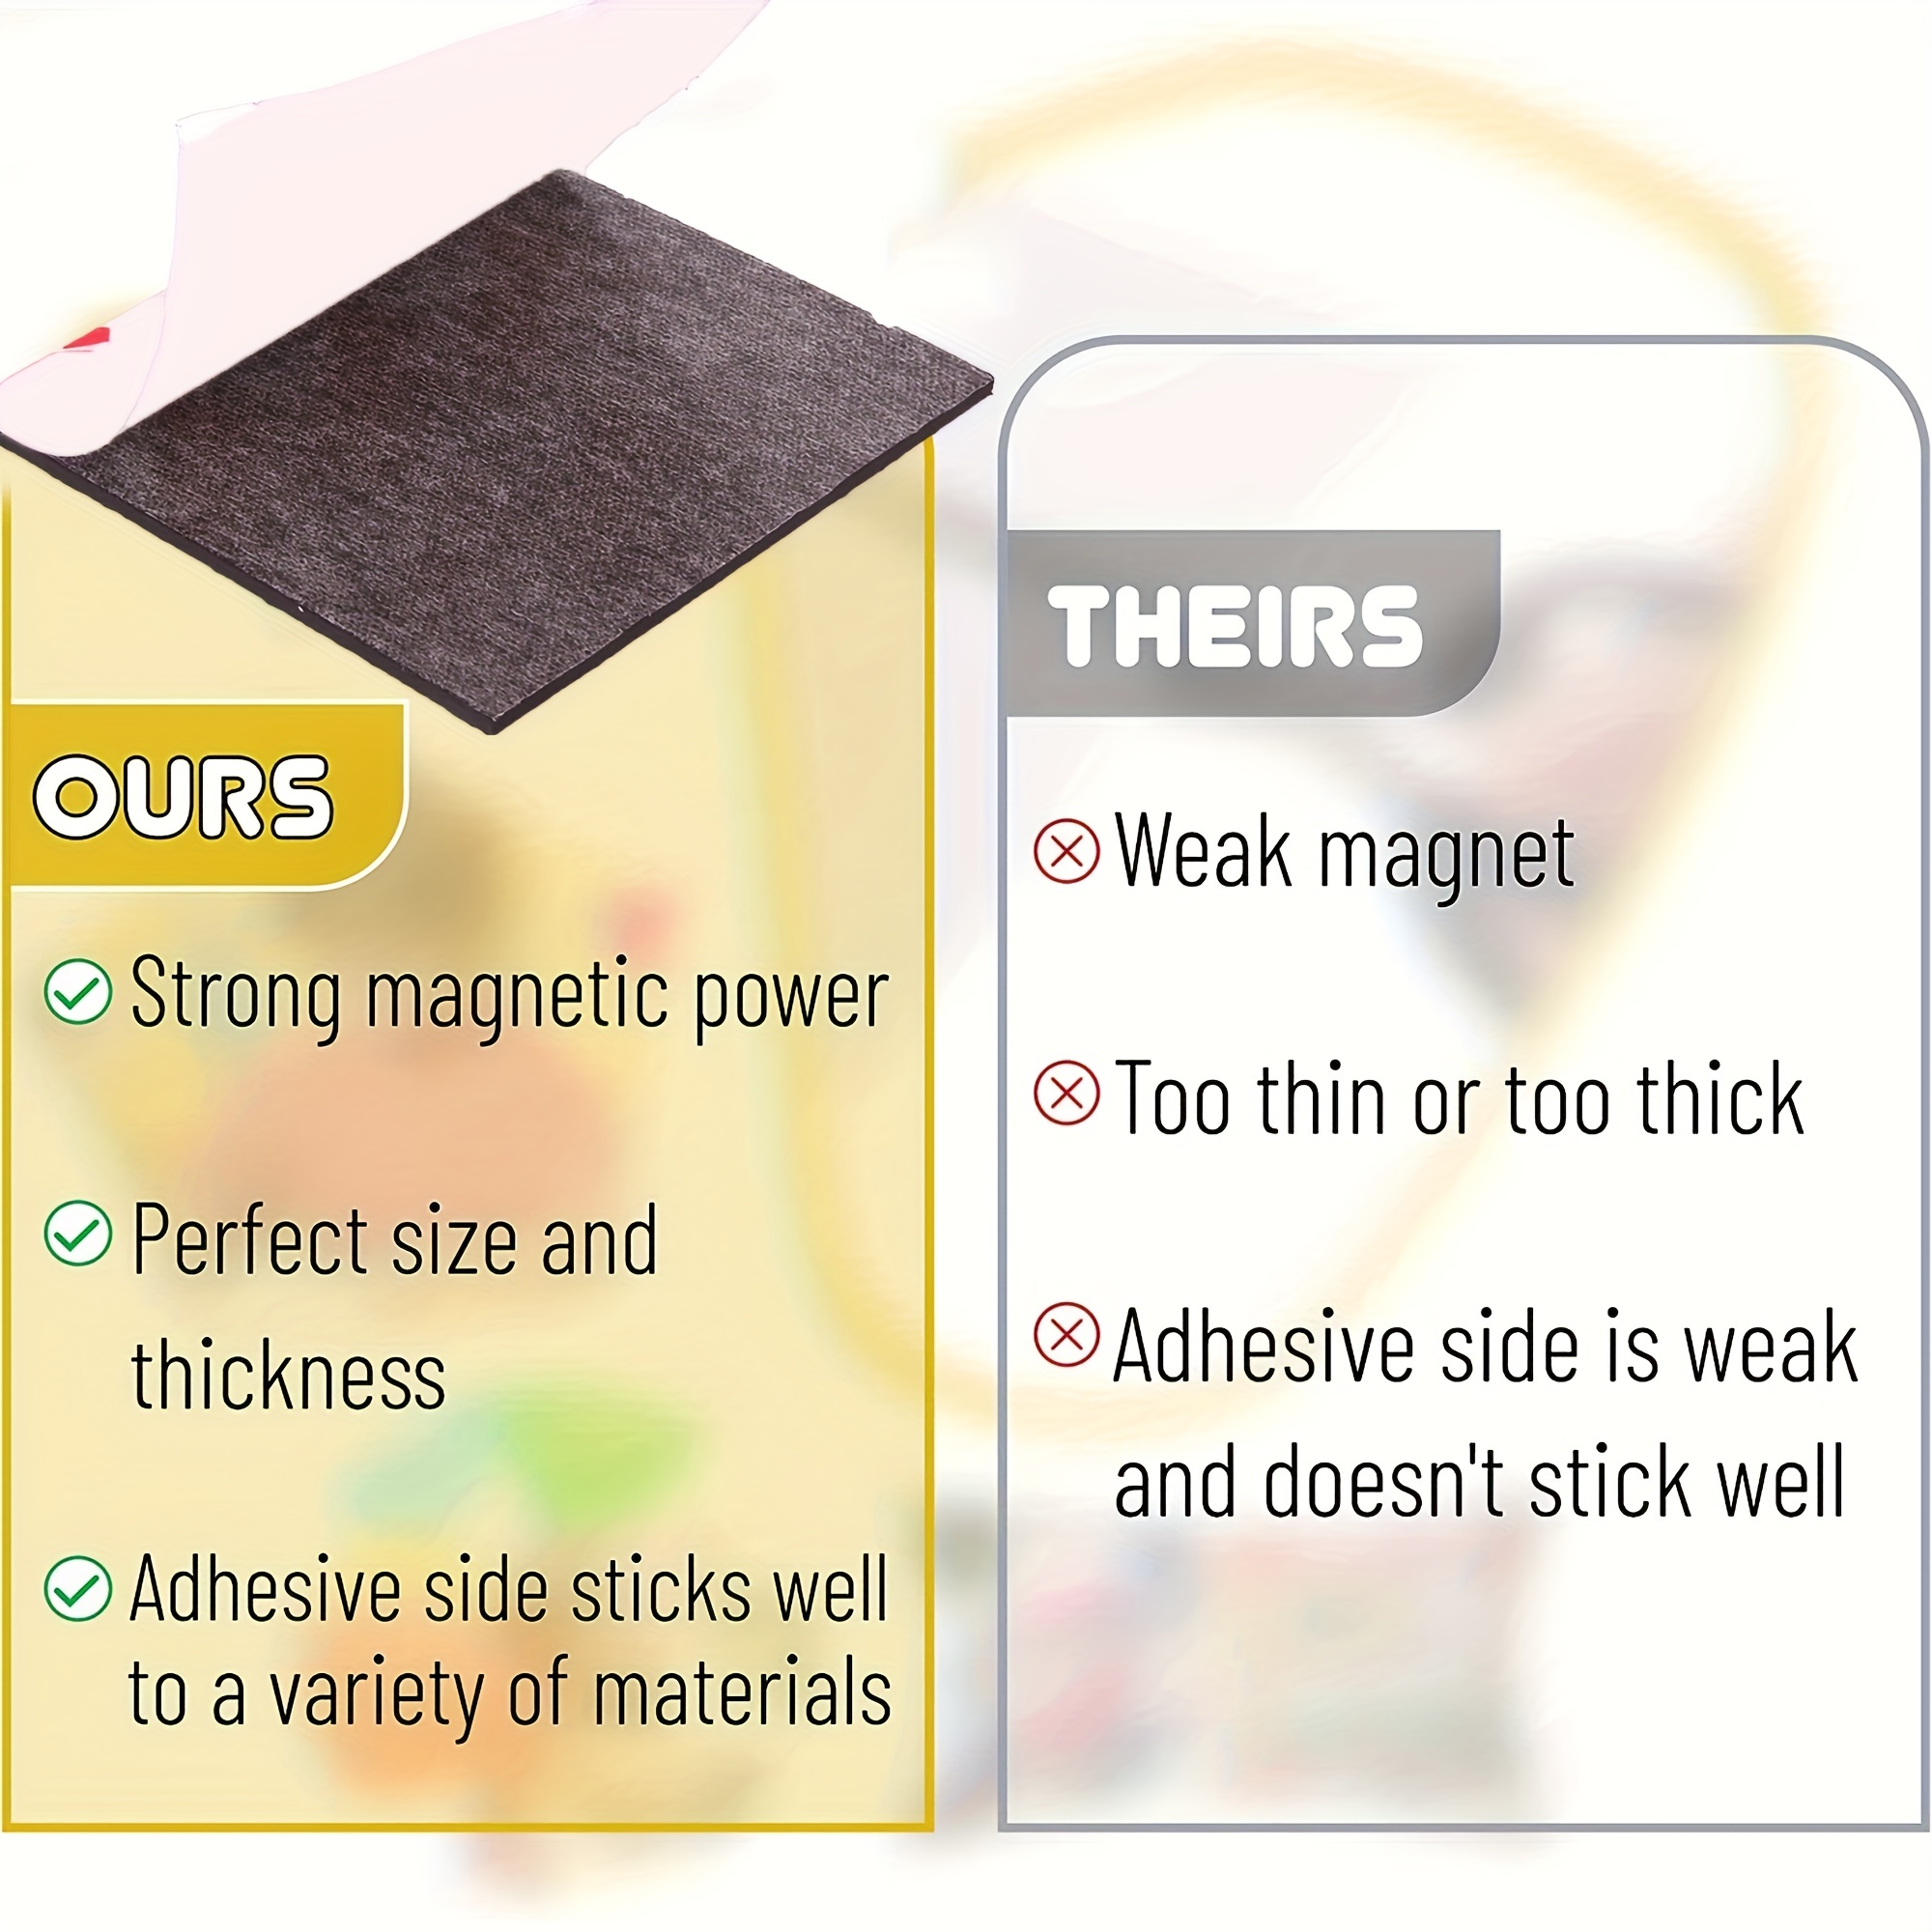 Magnetic Squares - Self Adhesive Magnetic Squares (Each 4/5 x 4/5) -  Flexible Sticky Magnets - Peel & Stick Magnetic Sheets - Tape is  Alternative to